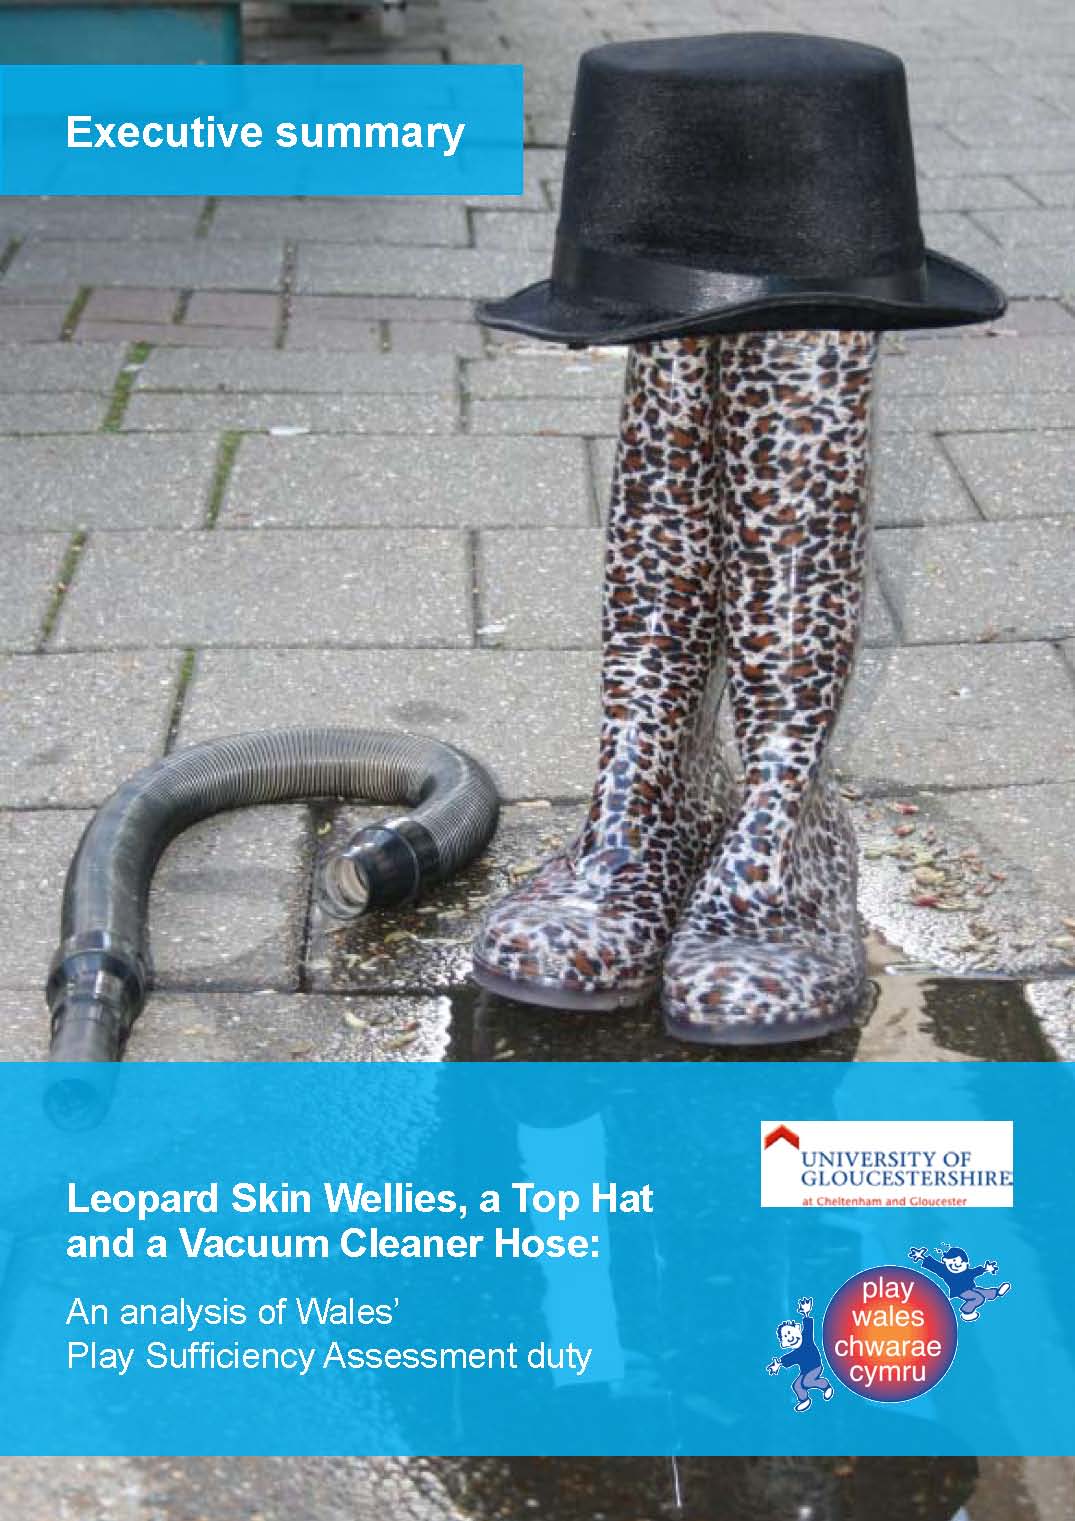 Leopard Skin Wellies, a Top Hat and a Vacuum Cleaner Hose…